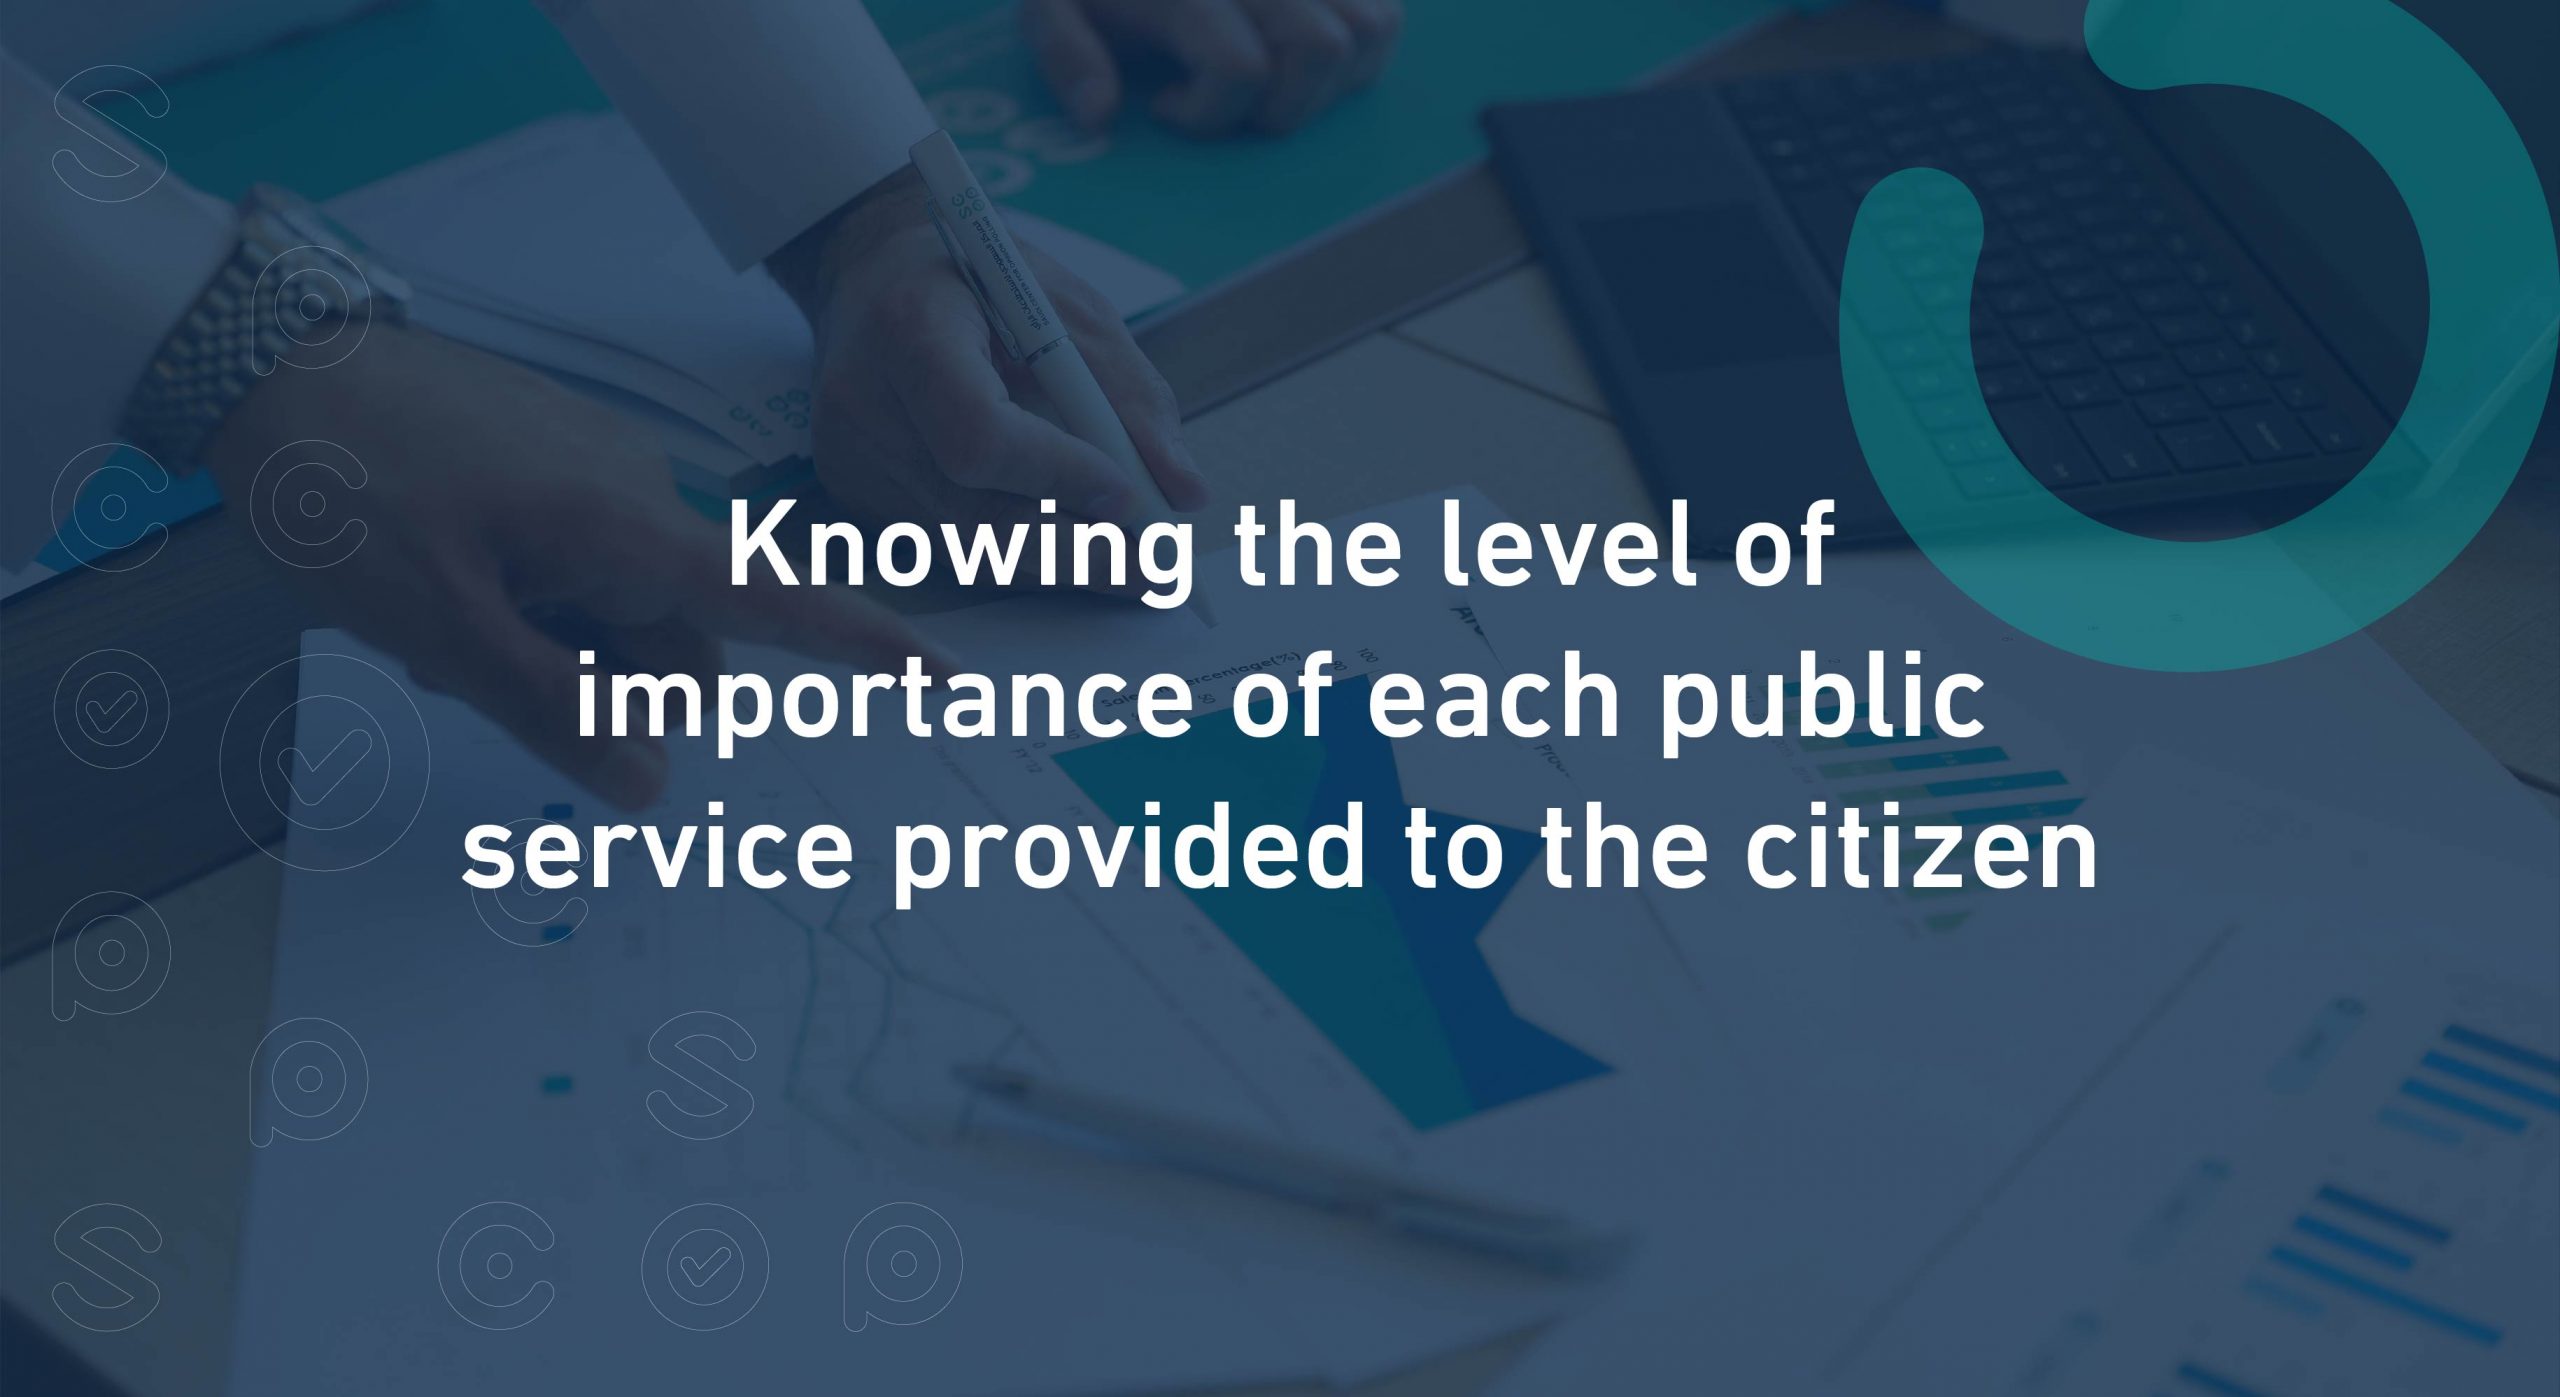 Knowing the level of importance of each public service provided to the citizen